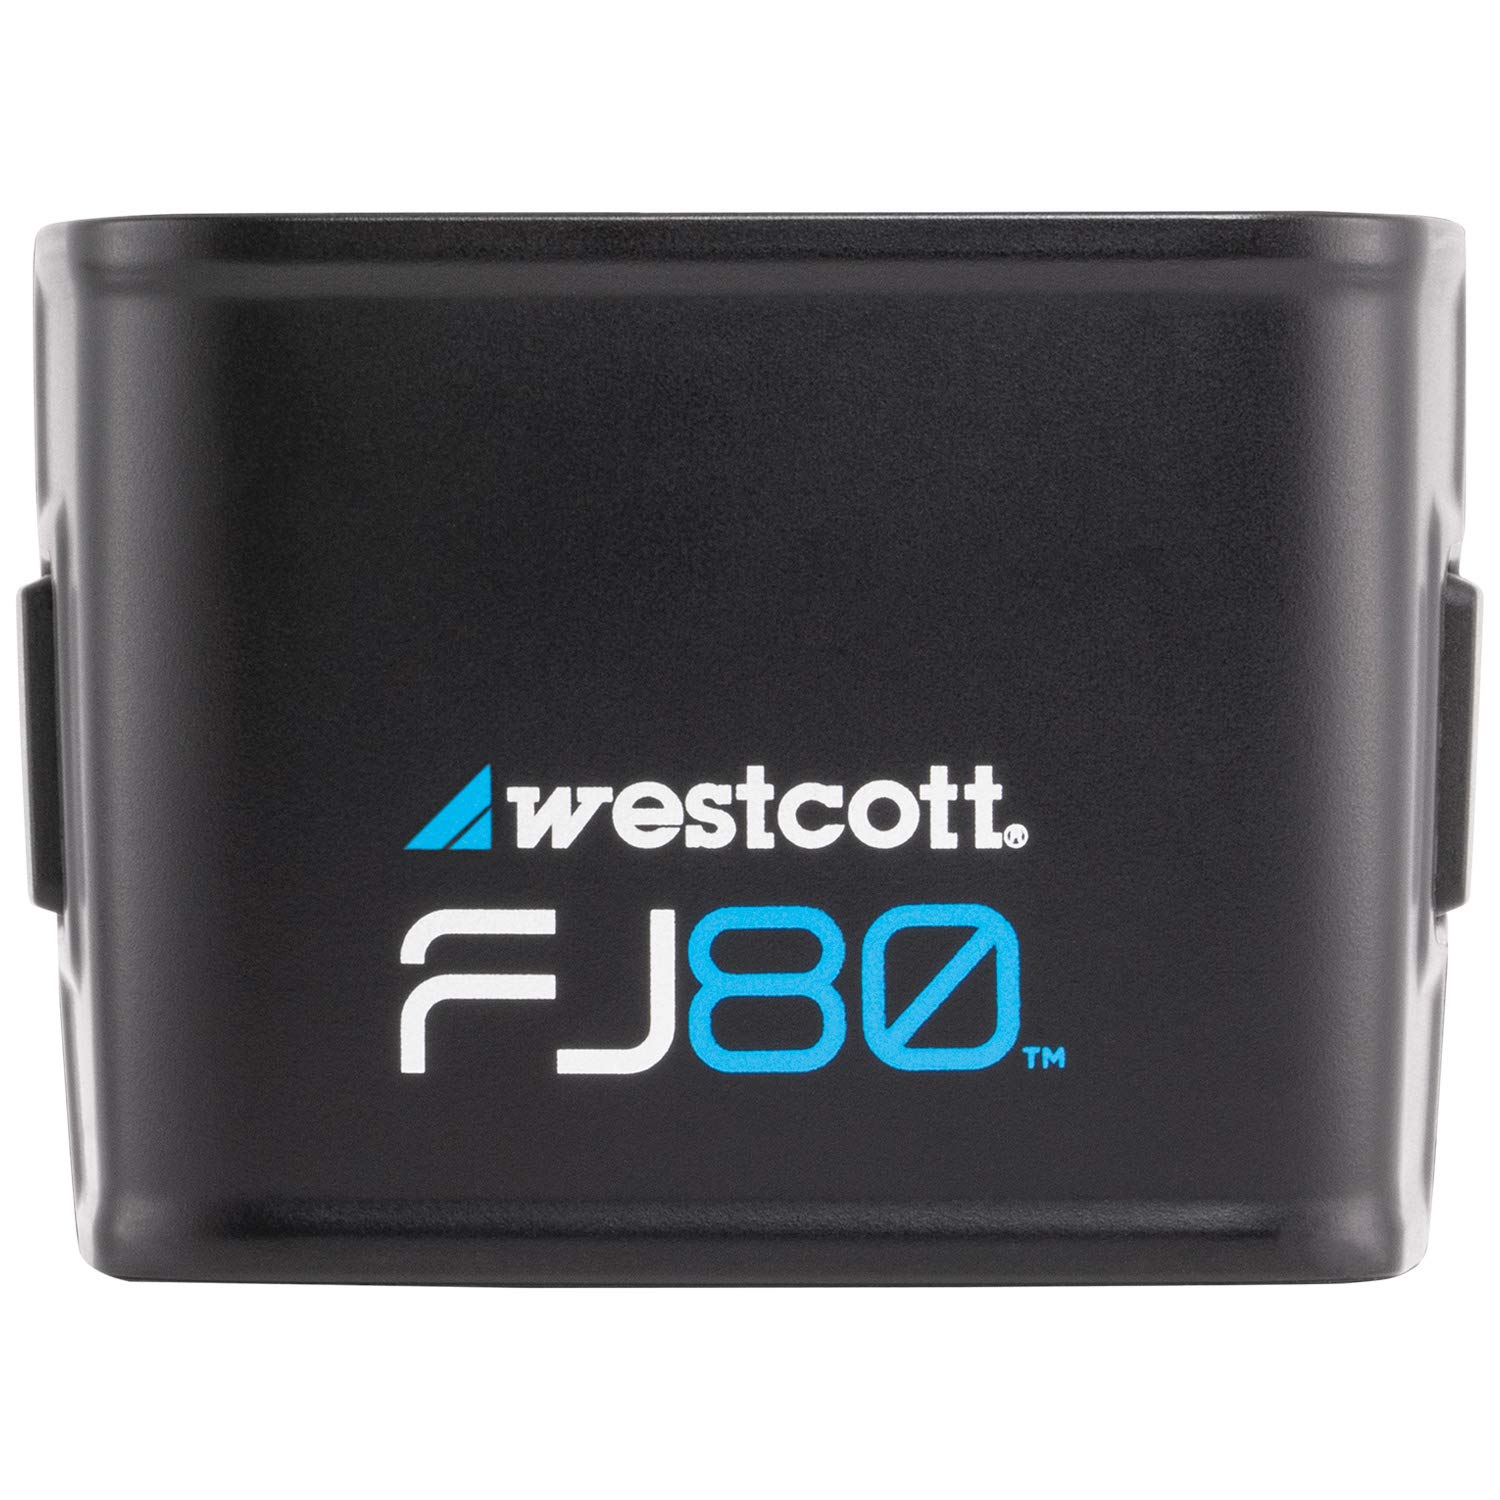 Westcott FJ80 Lithium Polymer Rechargeable Battery - DC 11.1V 1000mAh 11Wh 400+ Full Power Flashes and 300+Battery Cycles